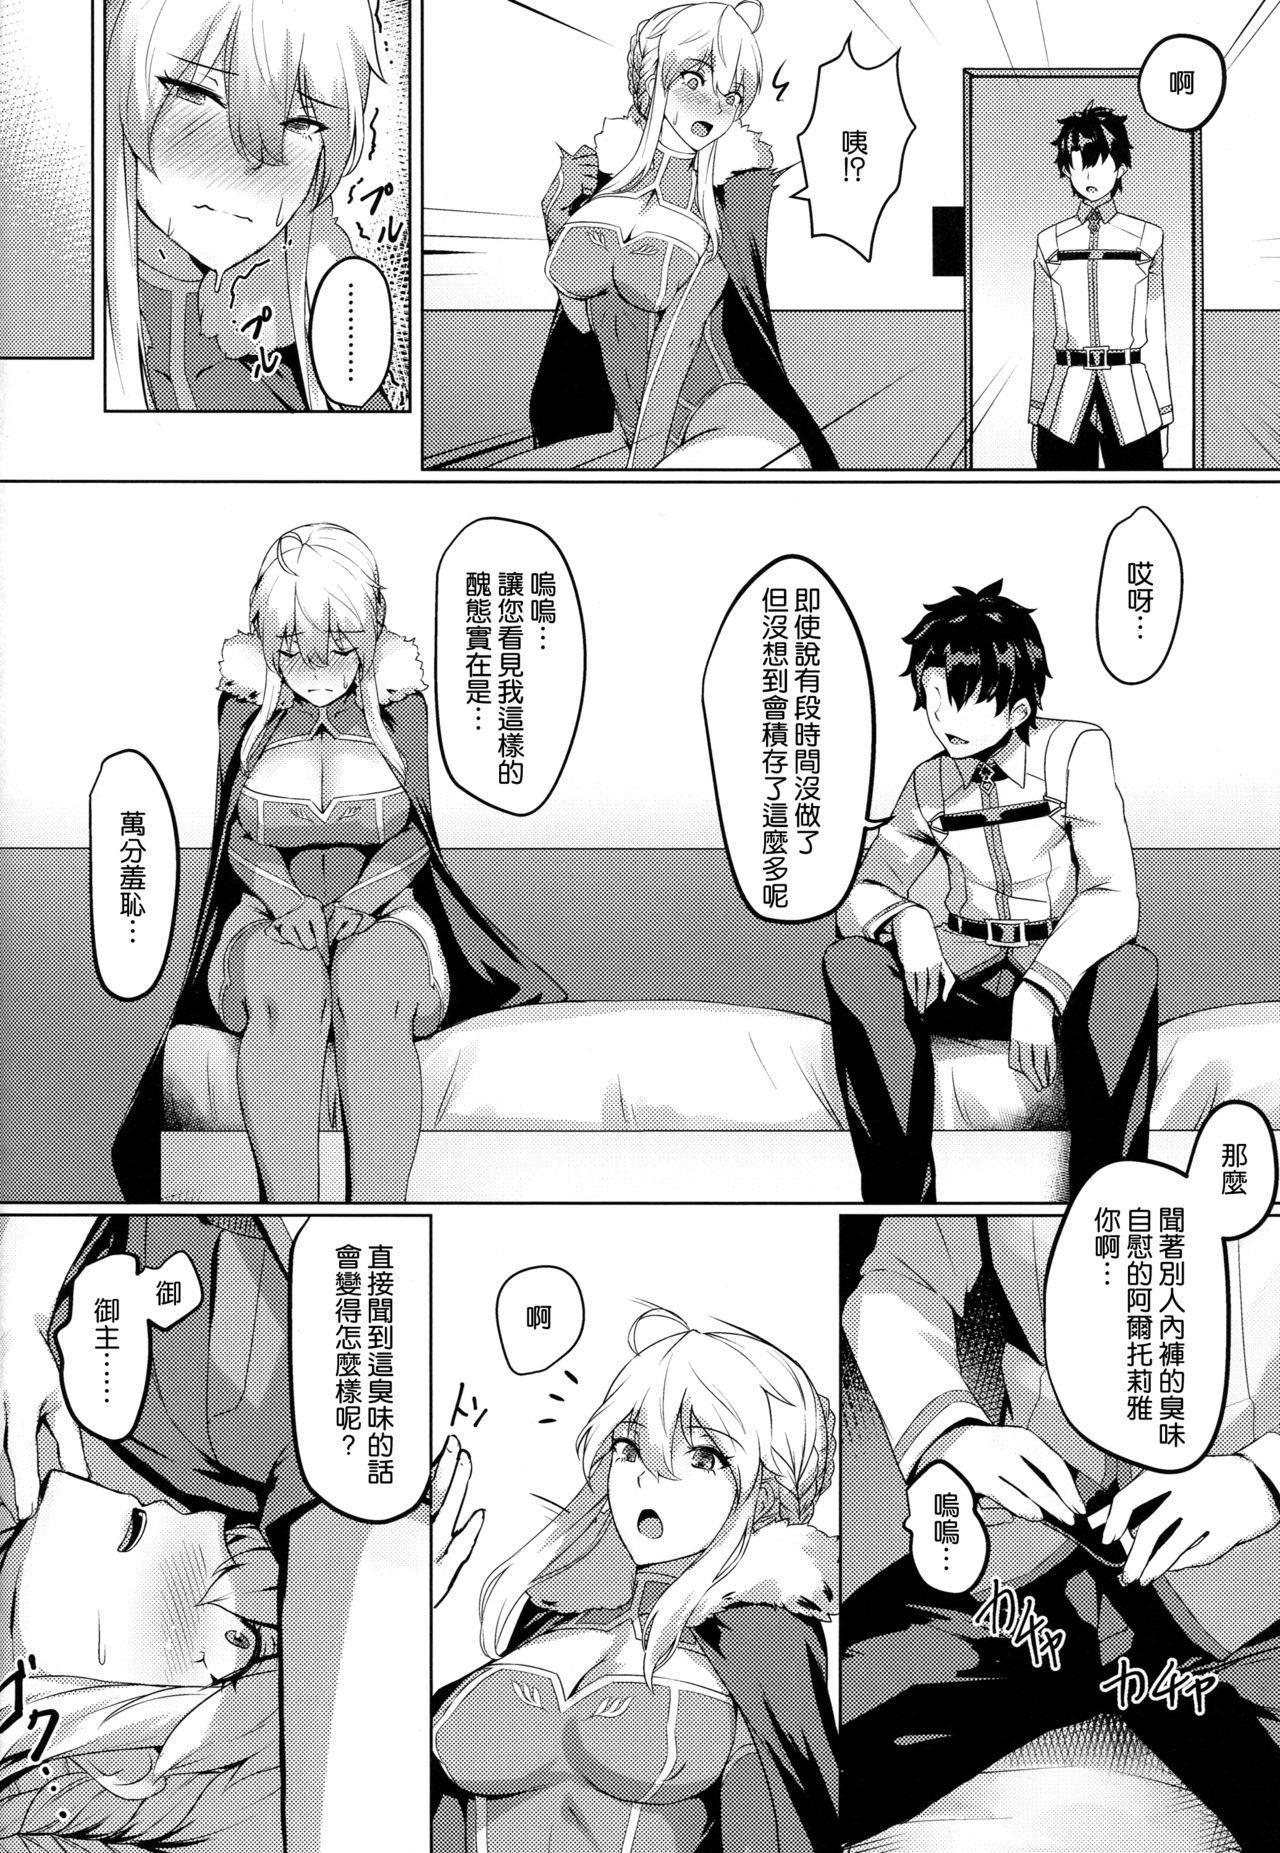 Hot Girls Getting Fucked Like Attracts Like - Fate grand order Highschool - Page 6